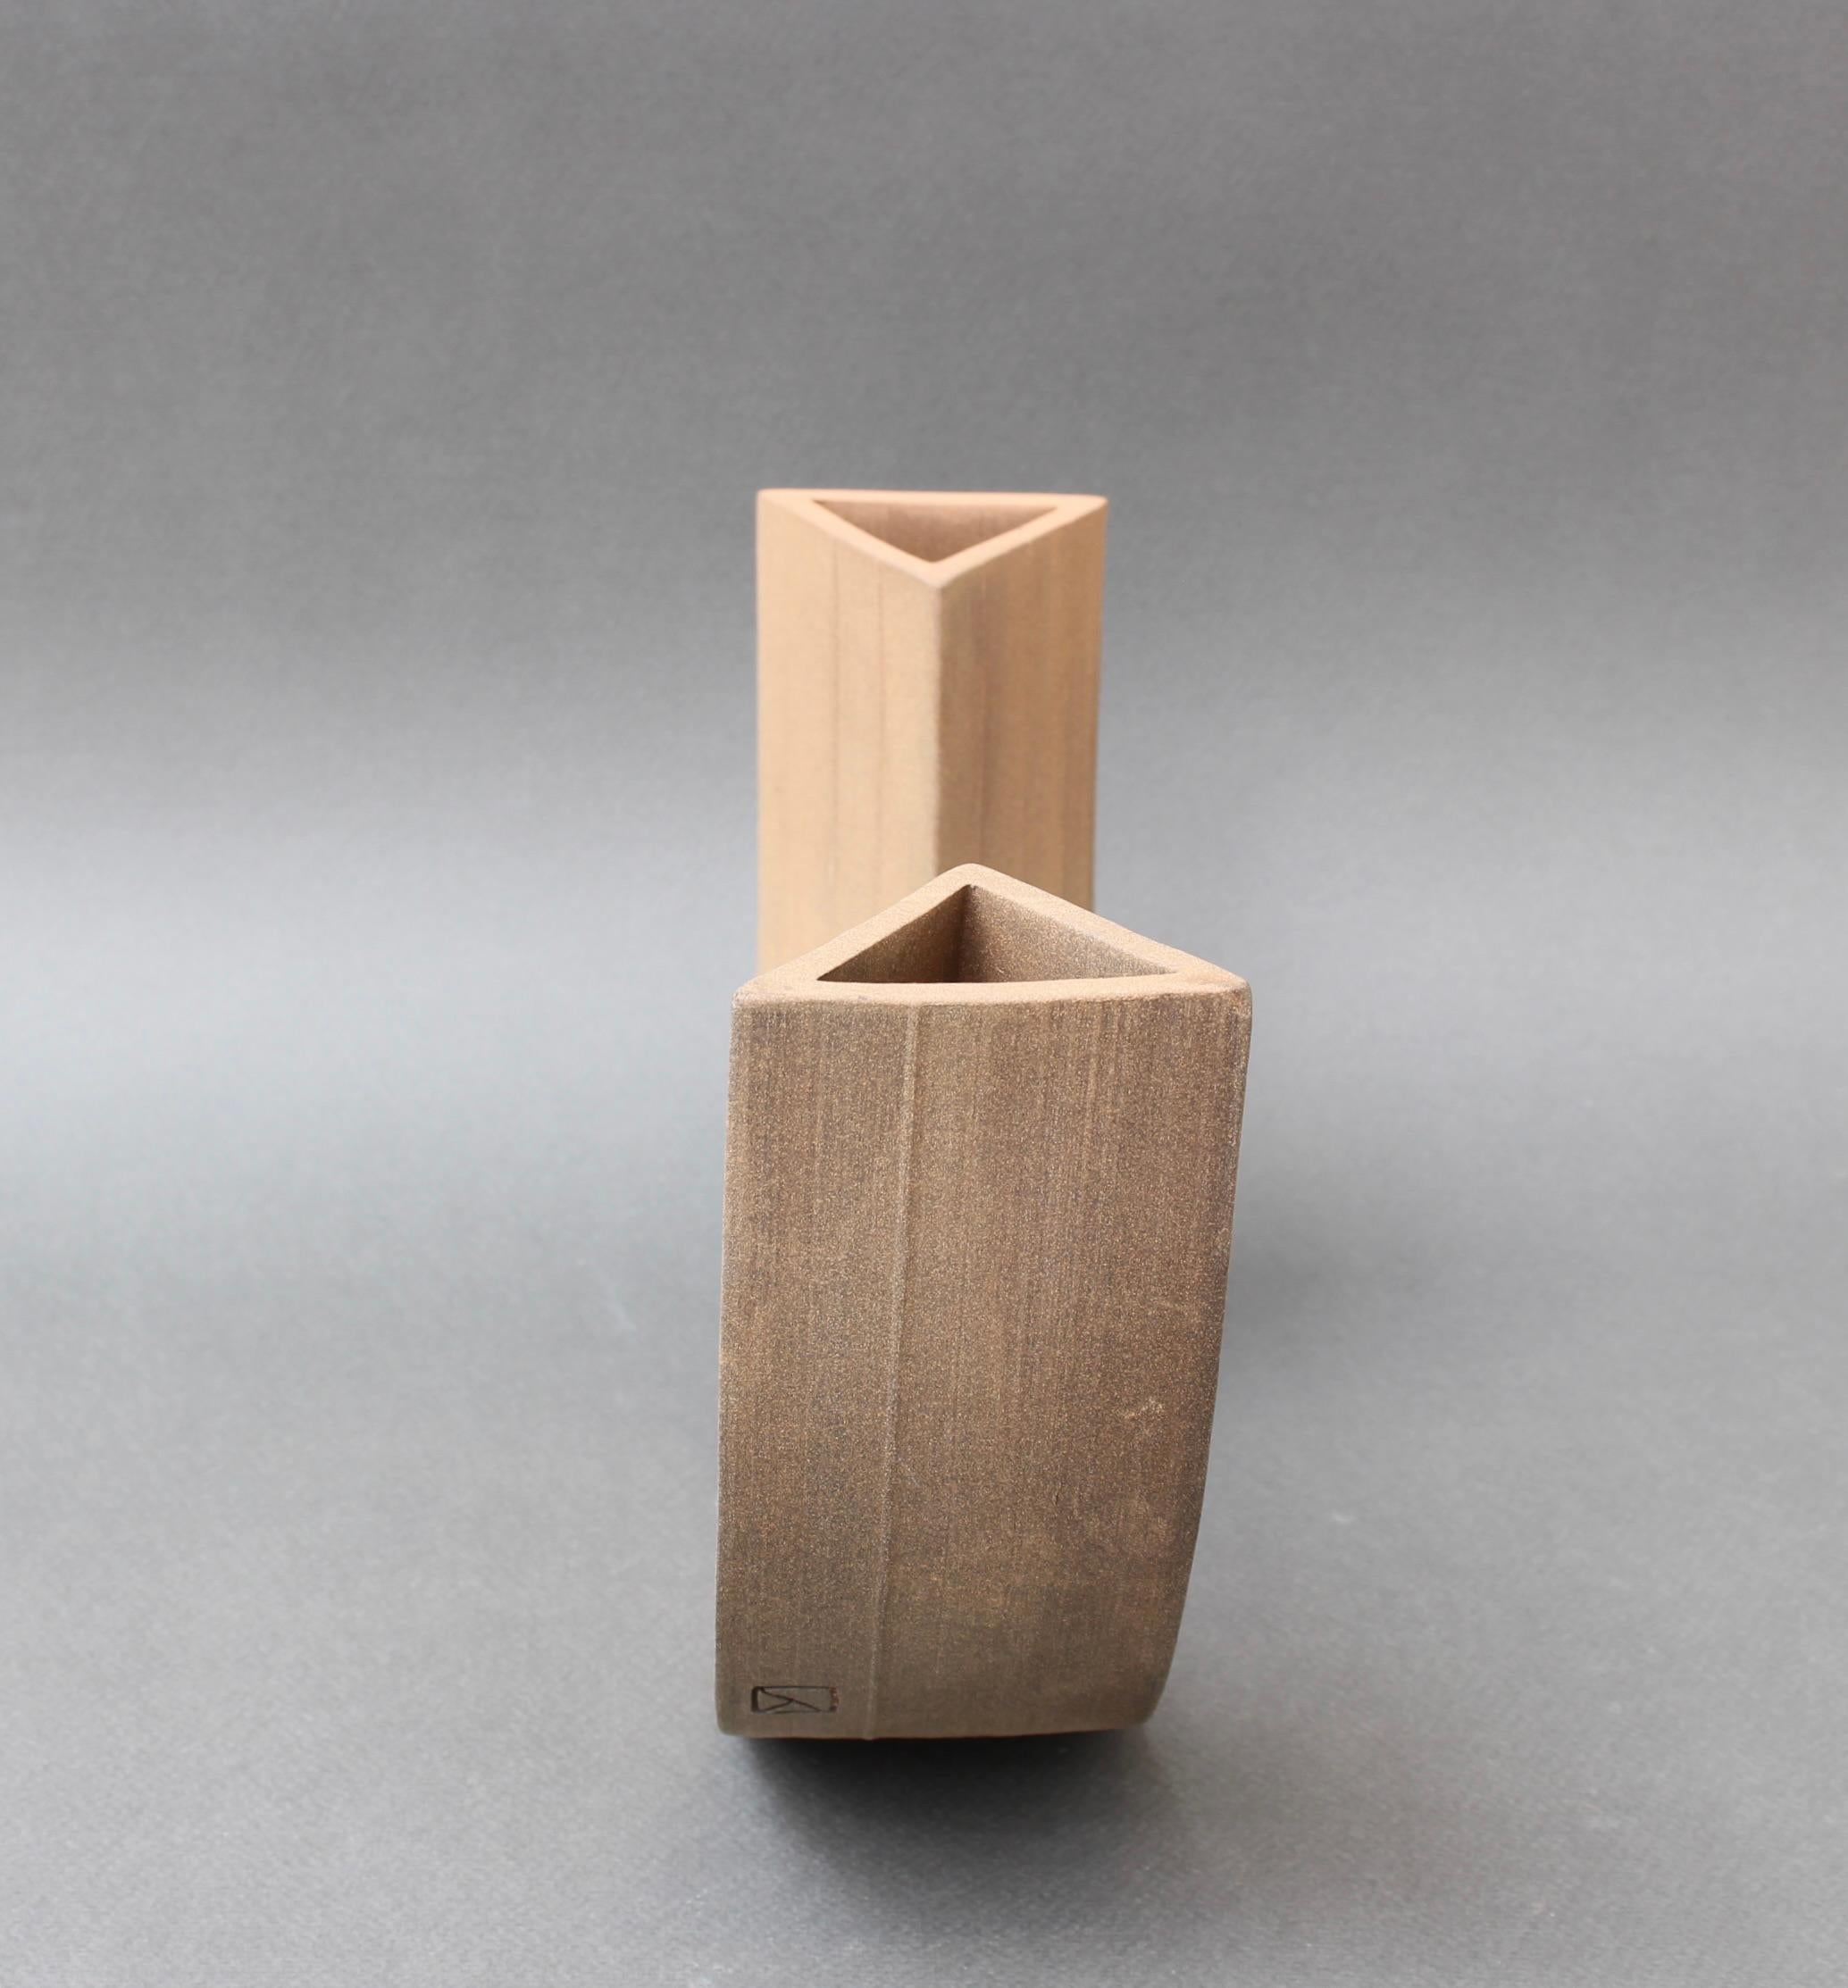 Italian Industrial Style Ceramic Vase / Sculpture by Alessio Tasca 'circa 1980s' For Sale 1